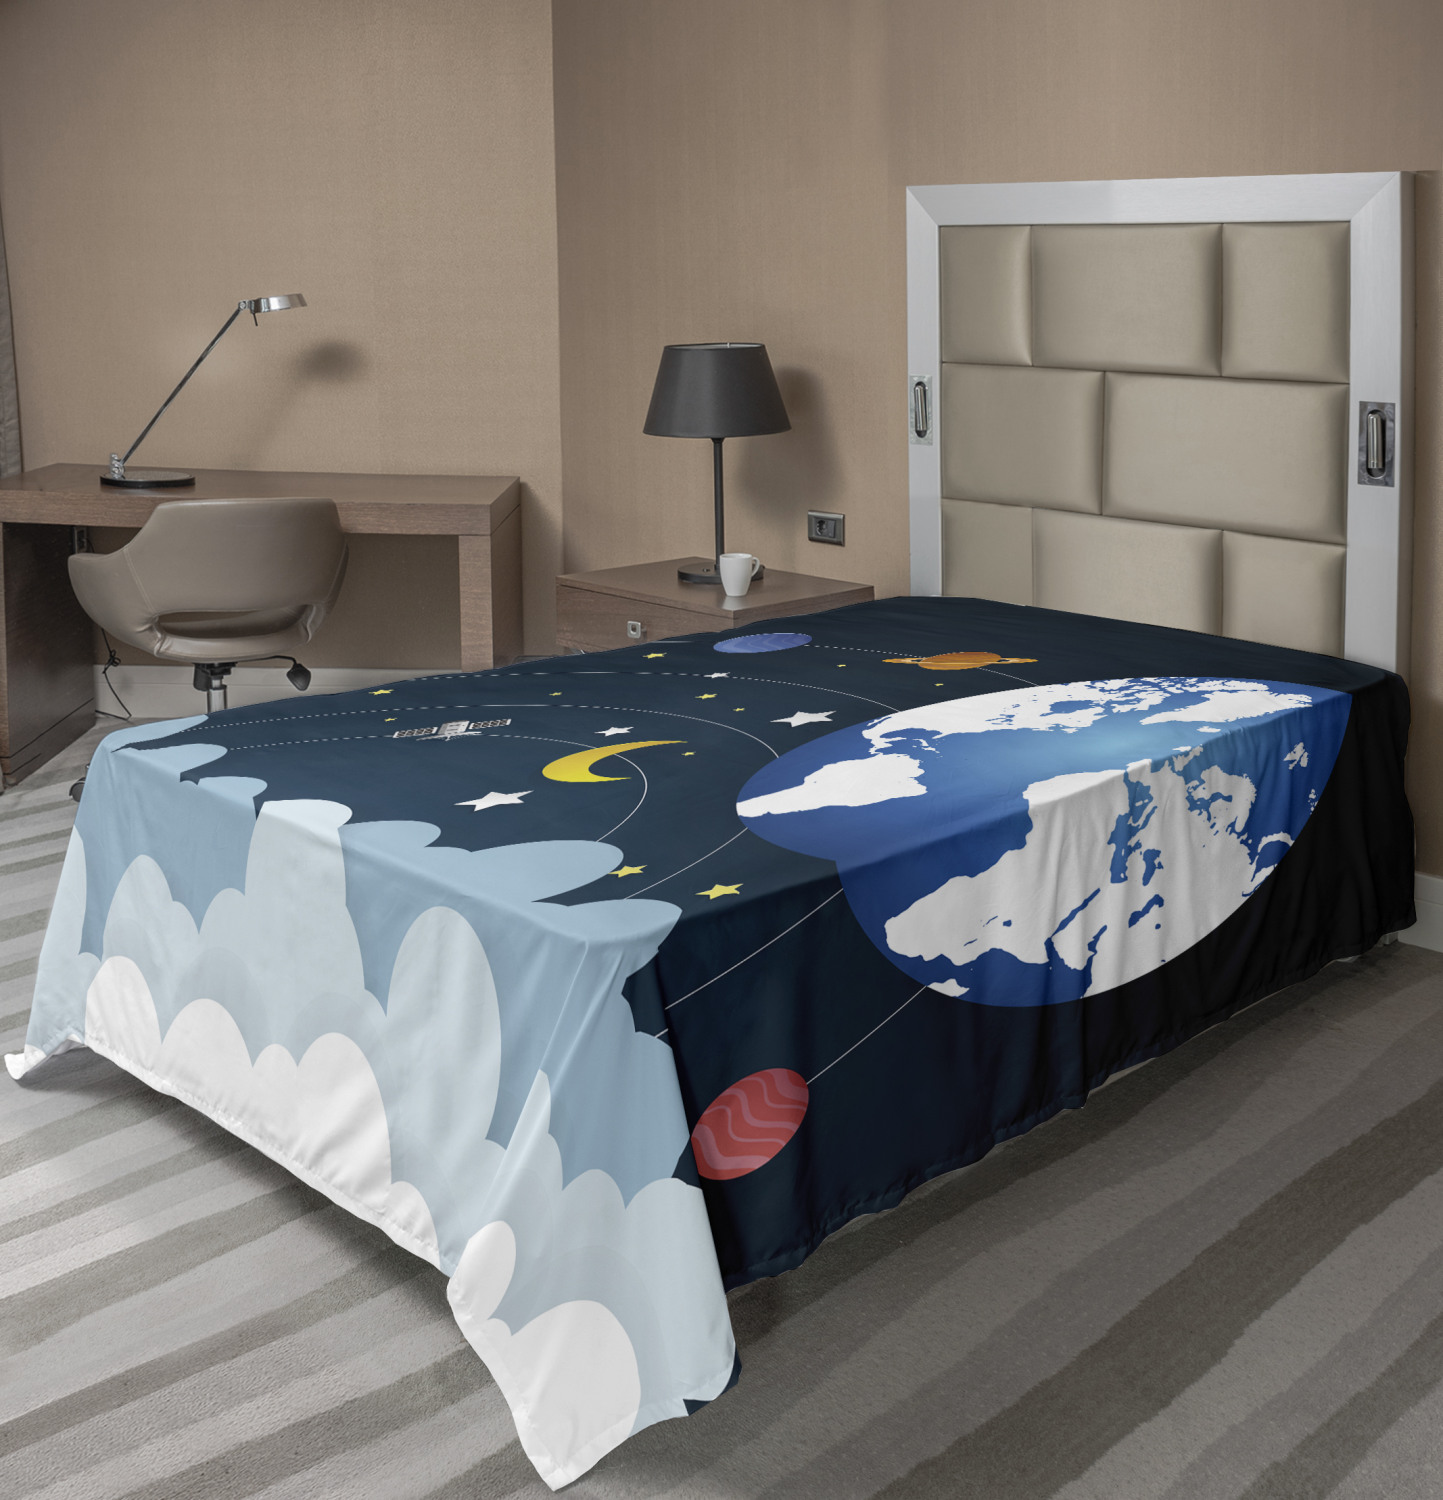 Blue and Pale Blue Twin Size Soft Comfortable Top Sheet Decorative Bedding 1 Piece Ambesonne Camo Flat Sheet Colorful Composition with Abstract Shapes in Sky Color Shades Dark Motifs